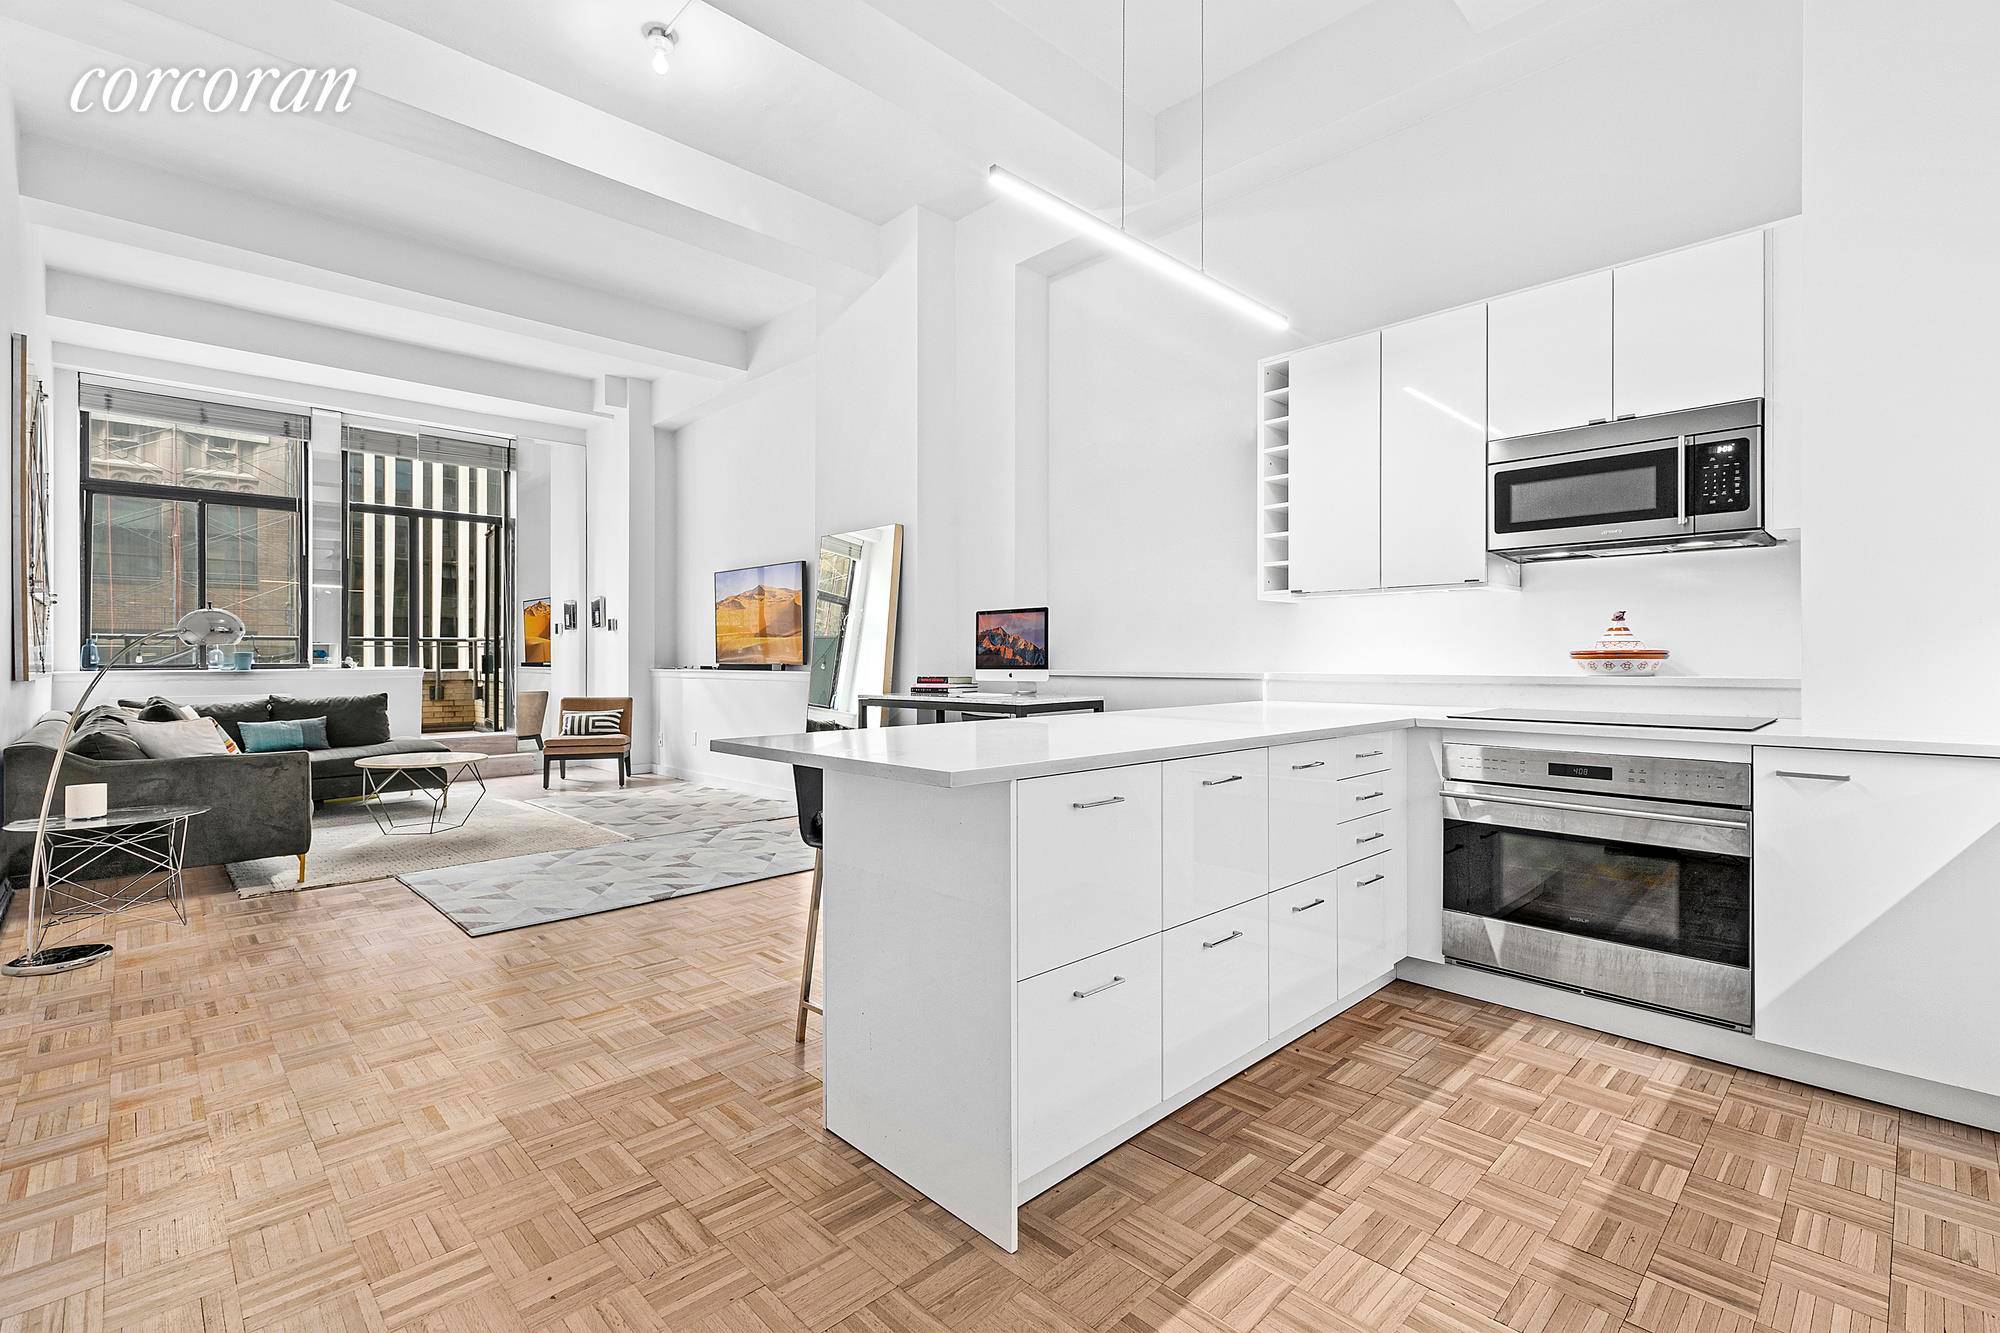 We are please to offer 310 East 46th Street 10H Prepare yourself to be wowed !